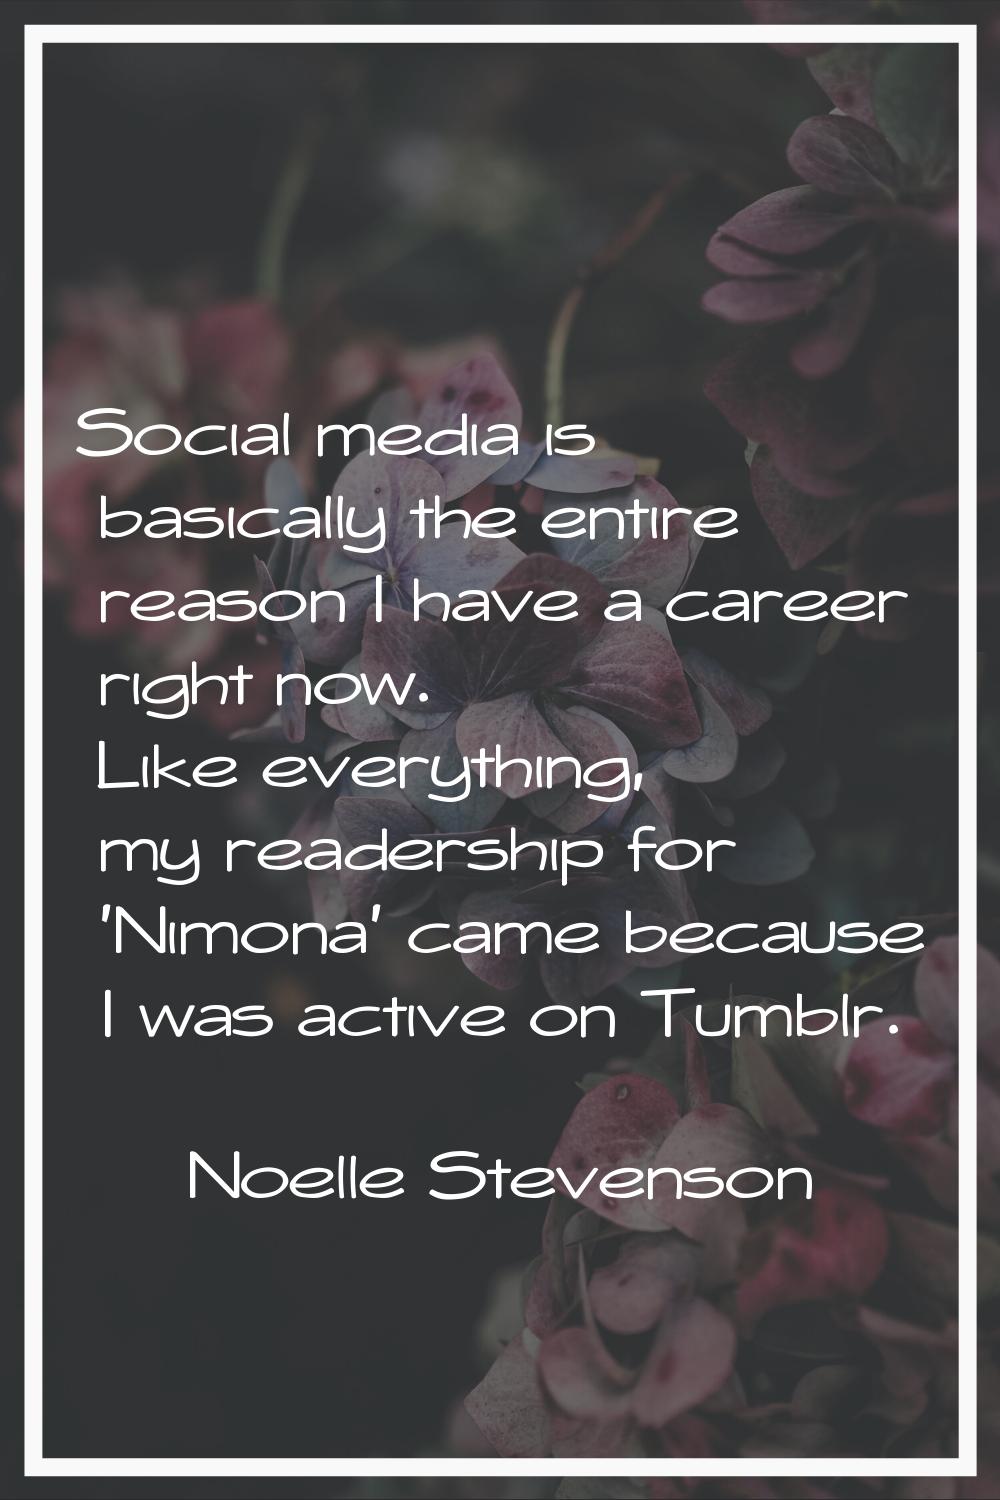 Social media is basically the entire reason I have a career right now. Like everything, my readersh